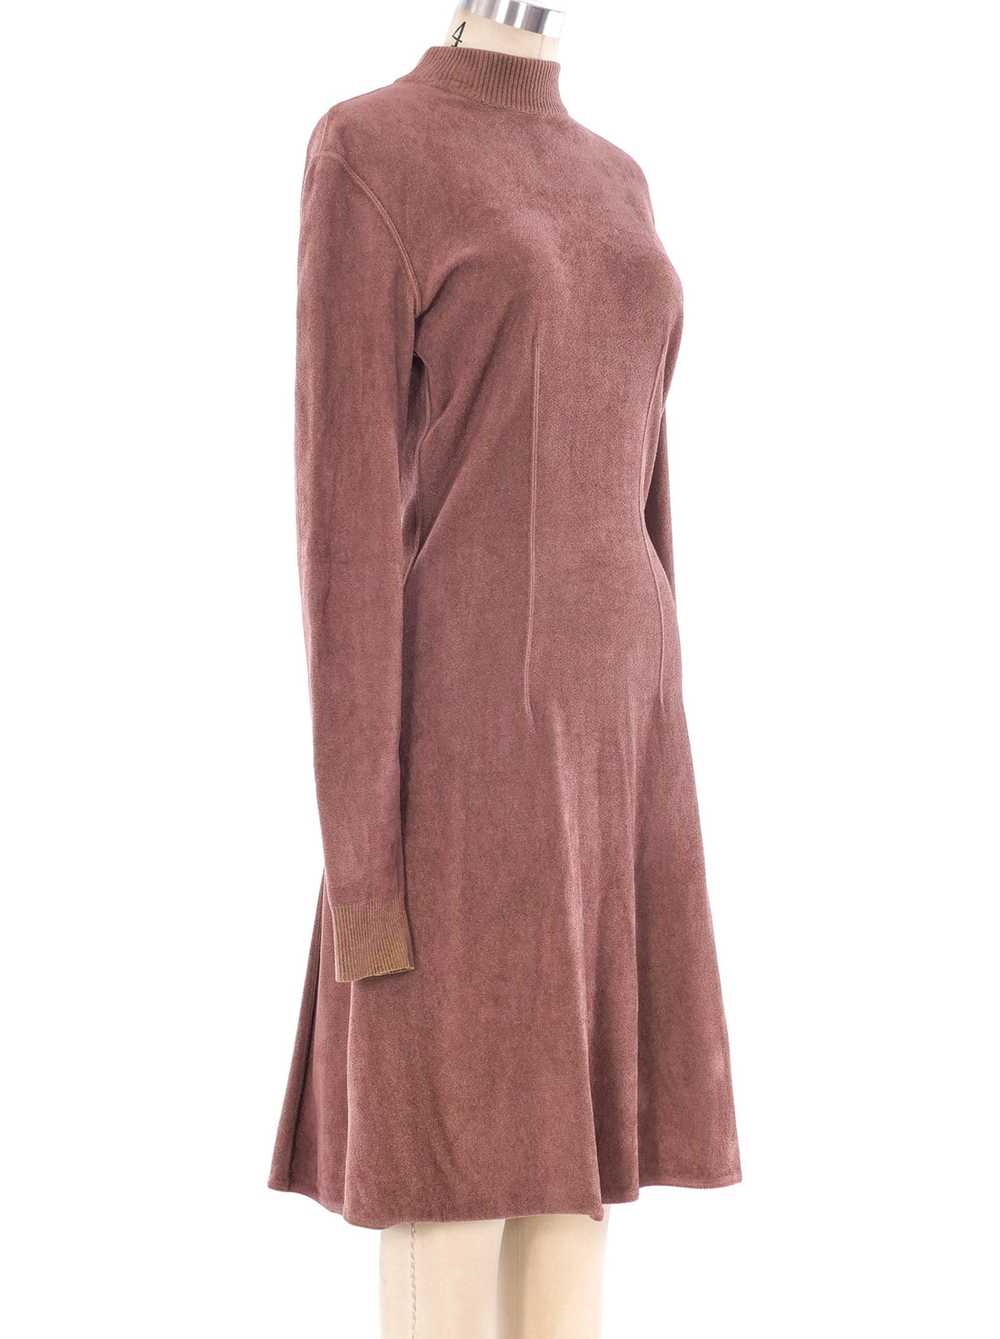 Alaia Camel Fit and Flare Knit Dress - image 3